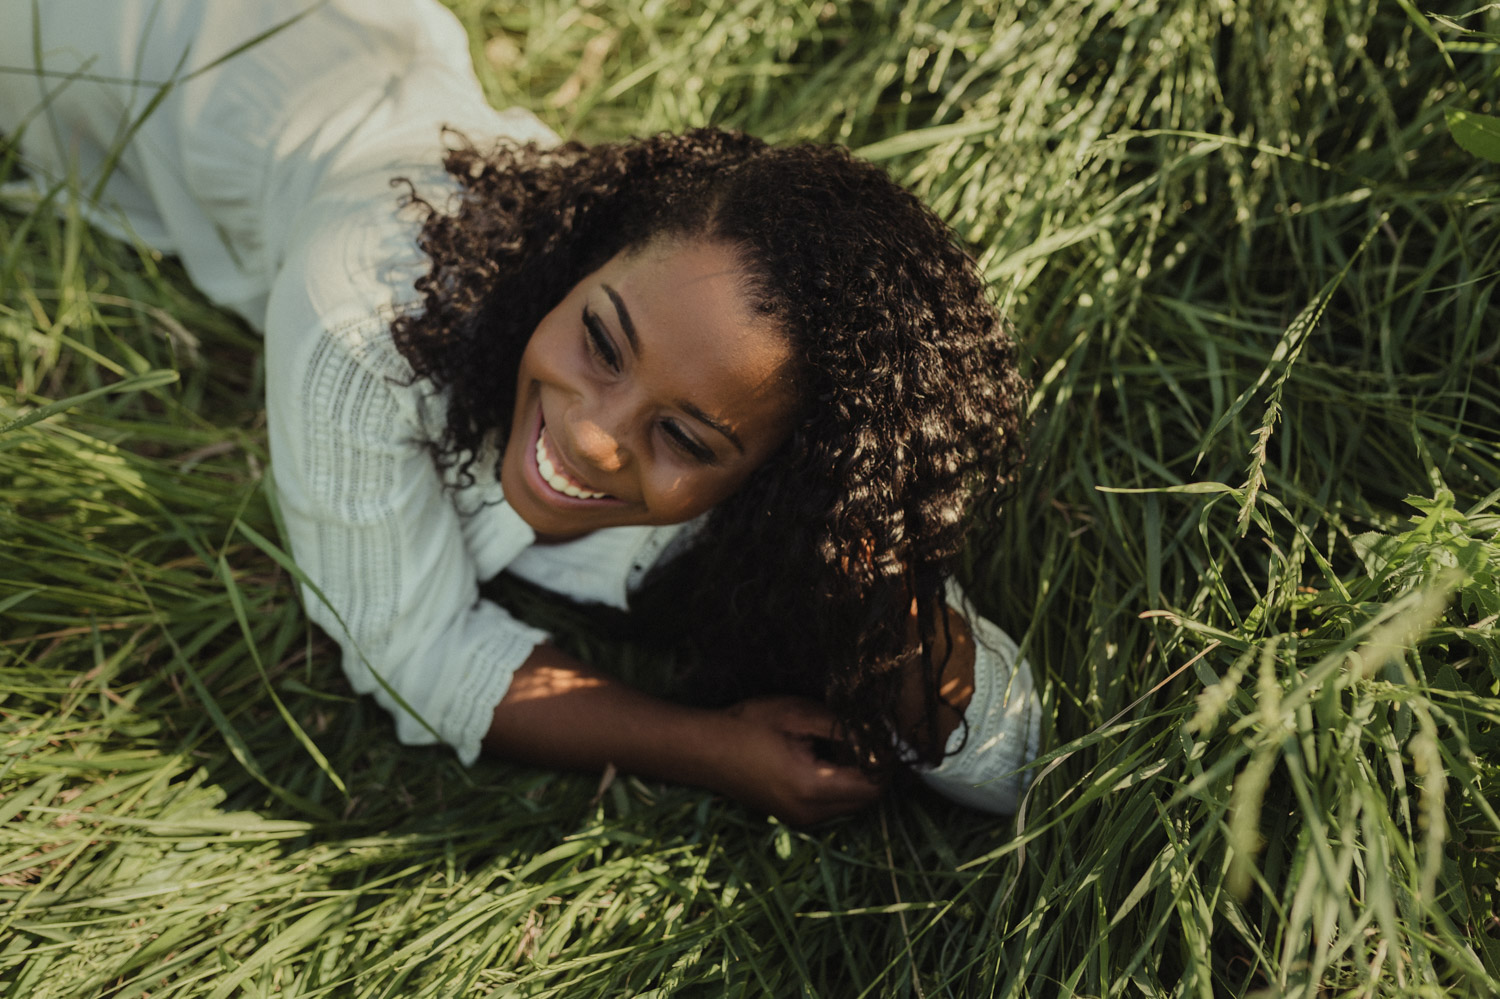 Reno senior photography, girl laughing on the grass photo. 